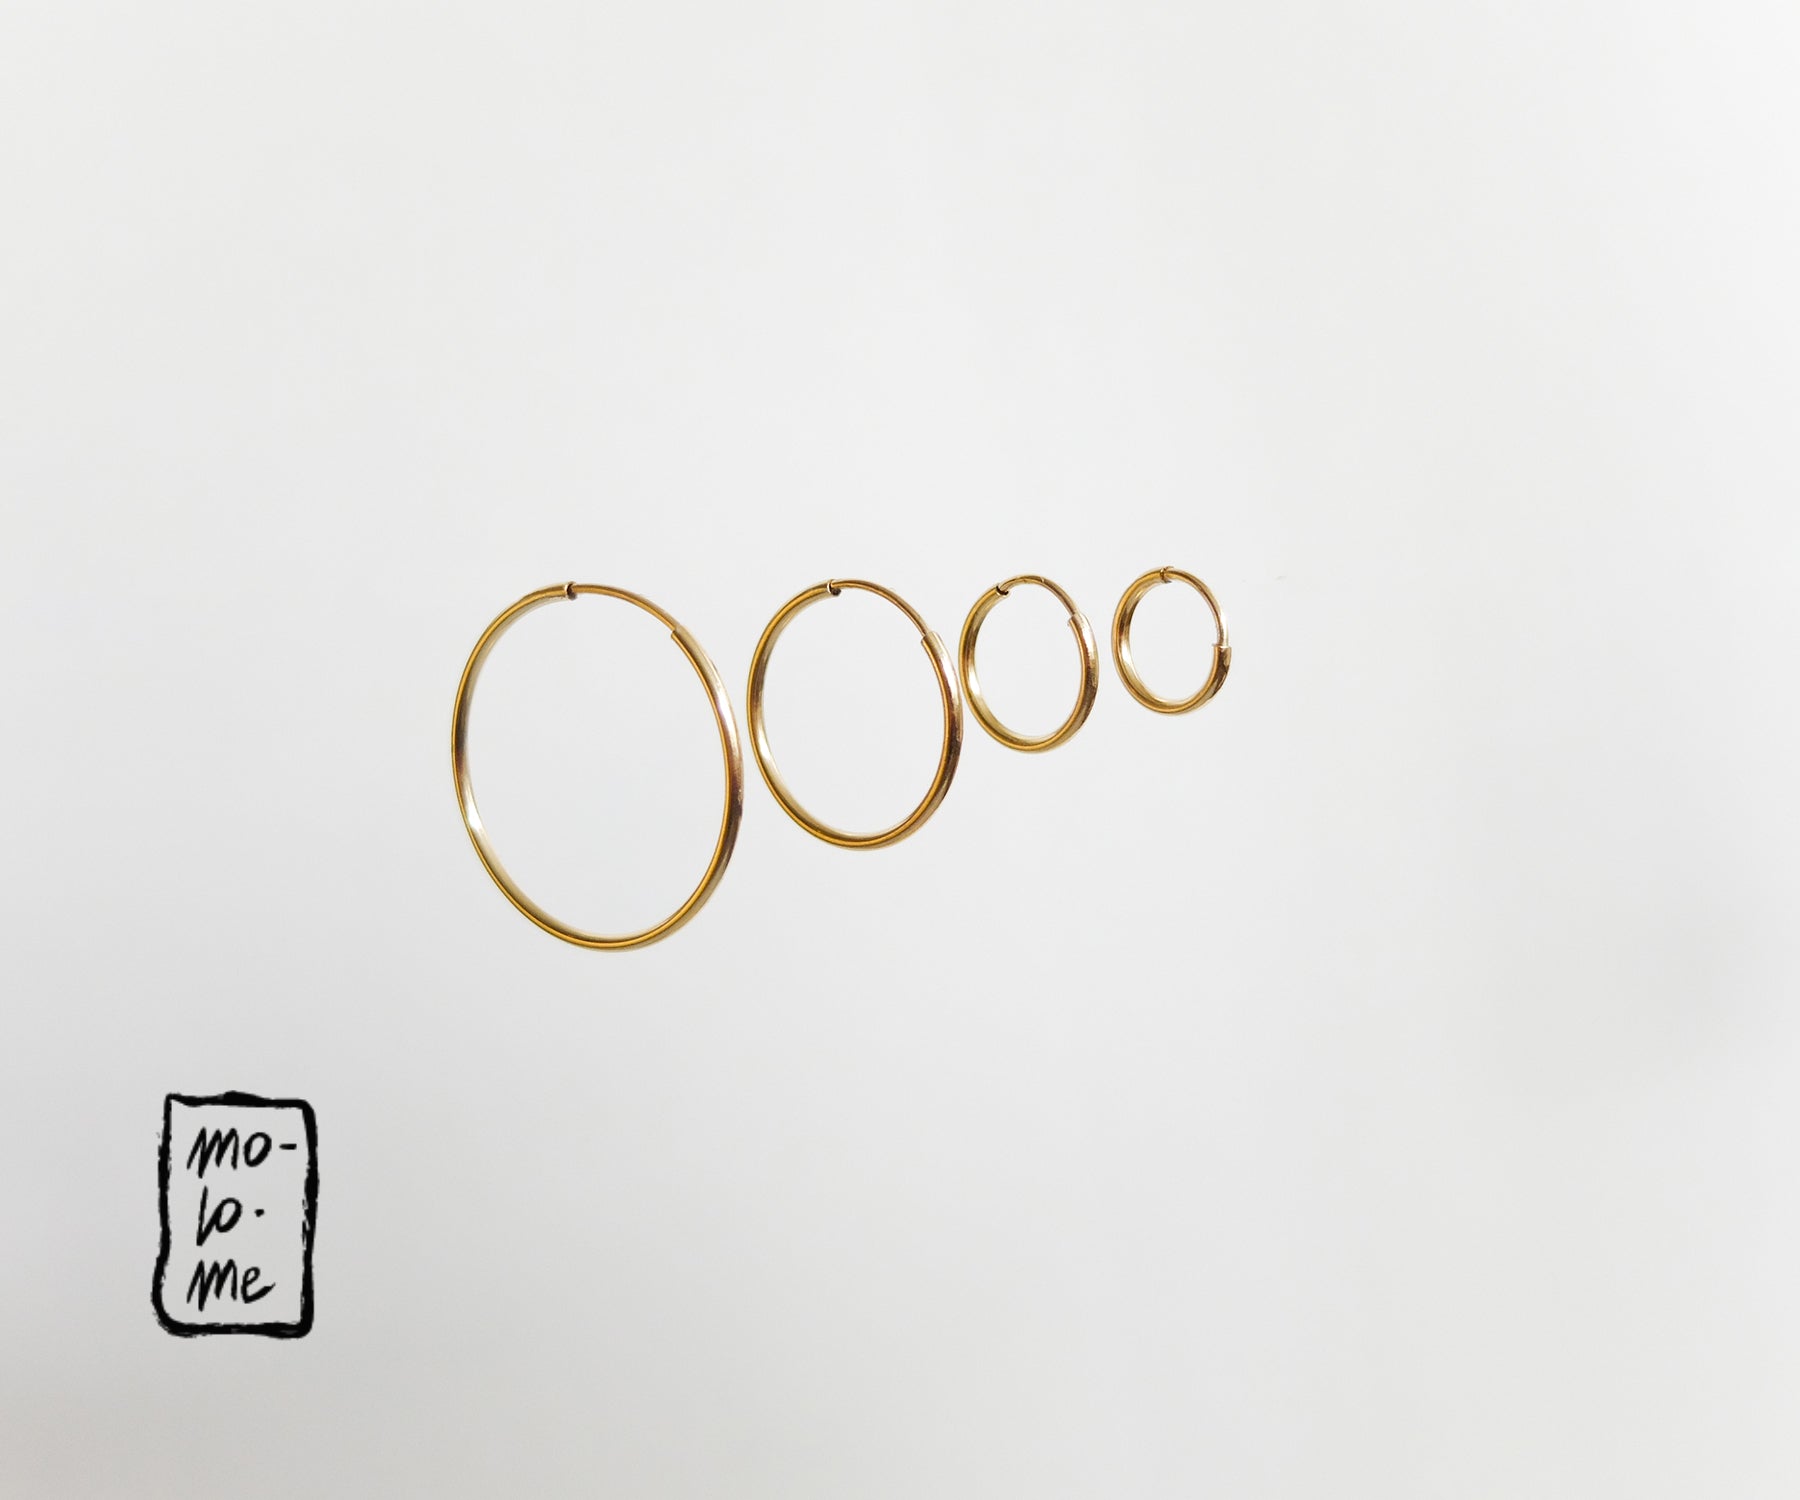 Gold-Filled Plain Small, Medium and Large Hoop Earrings at 9mm, 12mm, 16mm and 20mm.